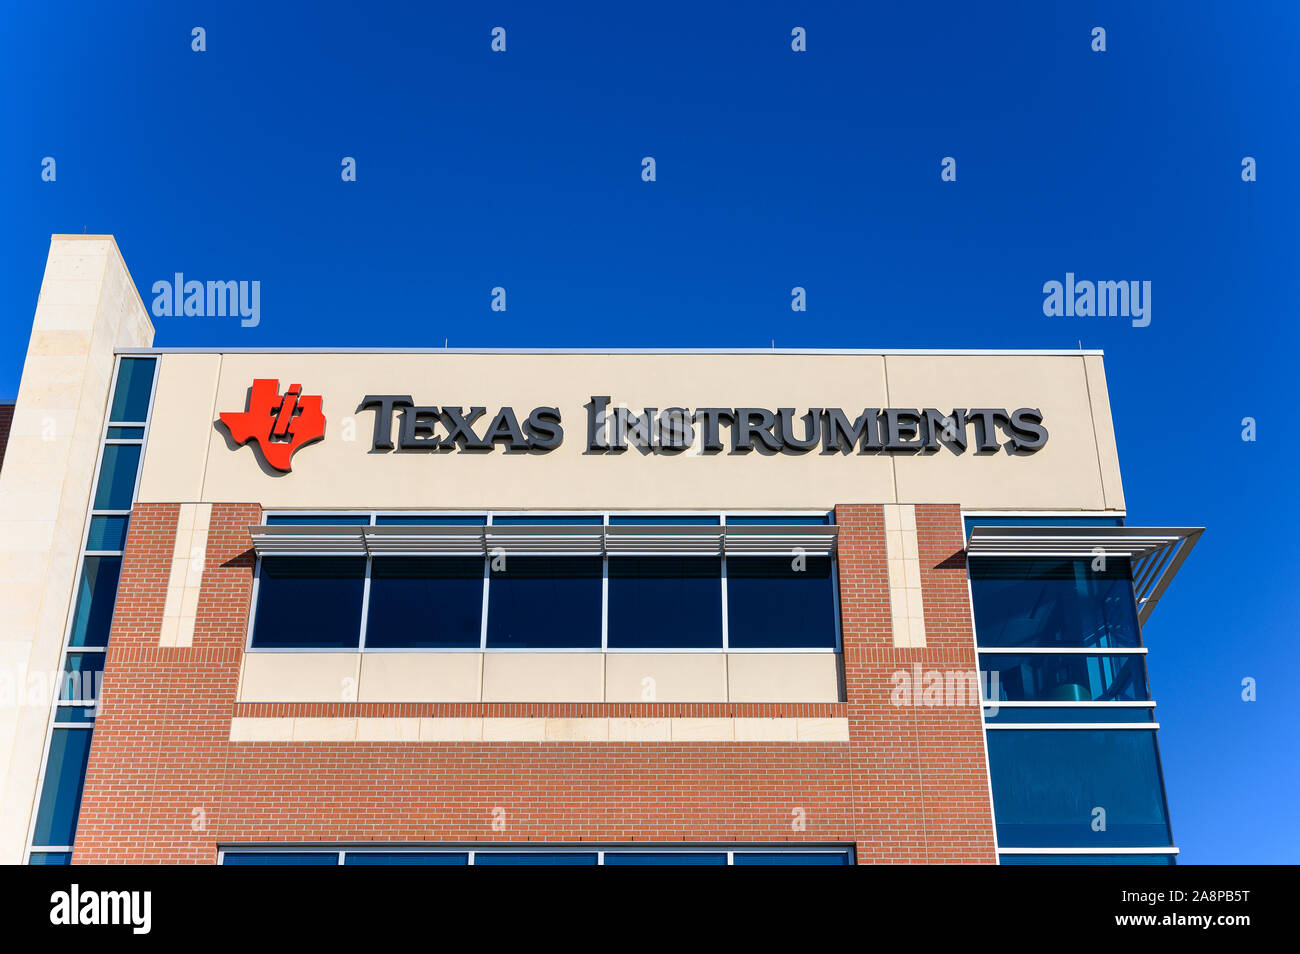 Sugar Land, Texas - Nov 9, 2019: Texas Instruments Sugar Land Facility. TI is an American technology company that designs and manufactures semiconduct Stock Photo